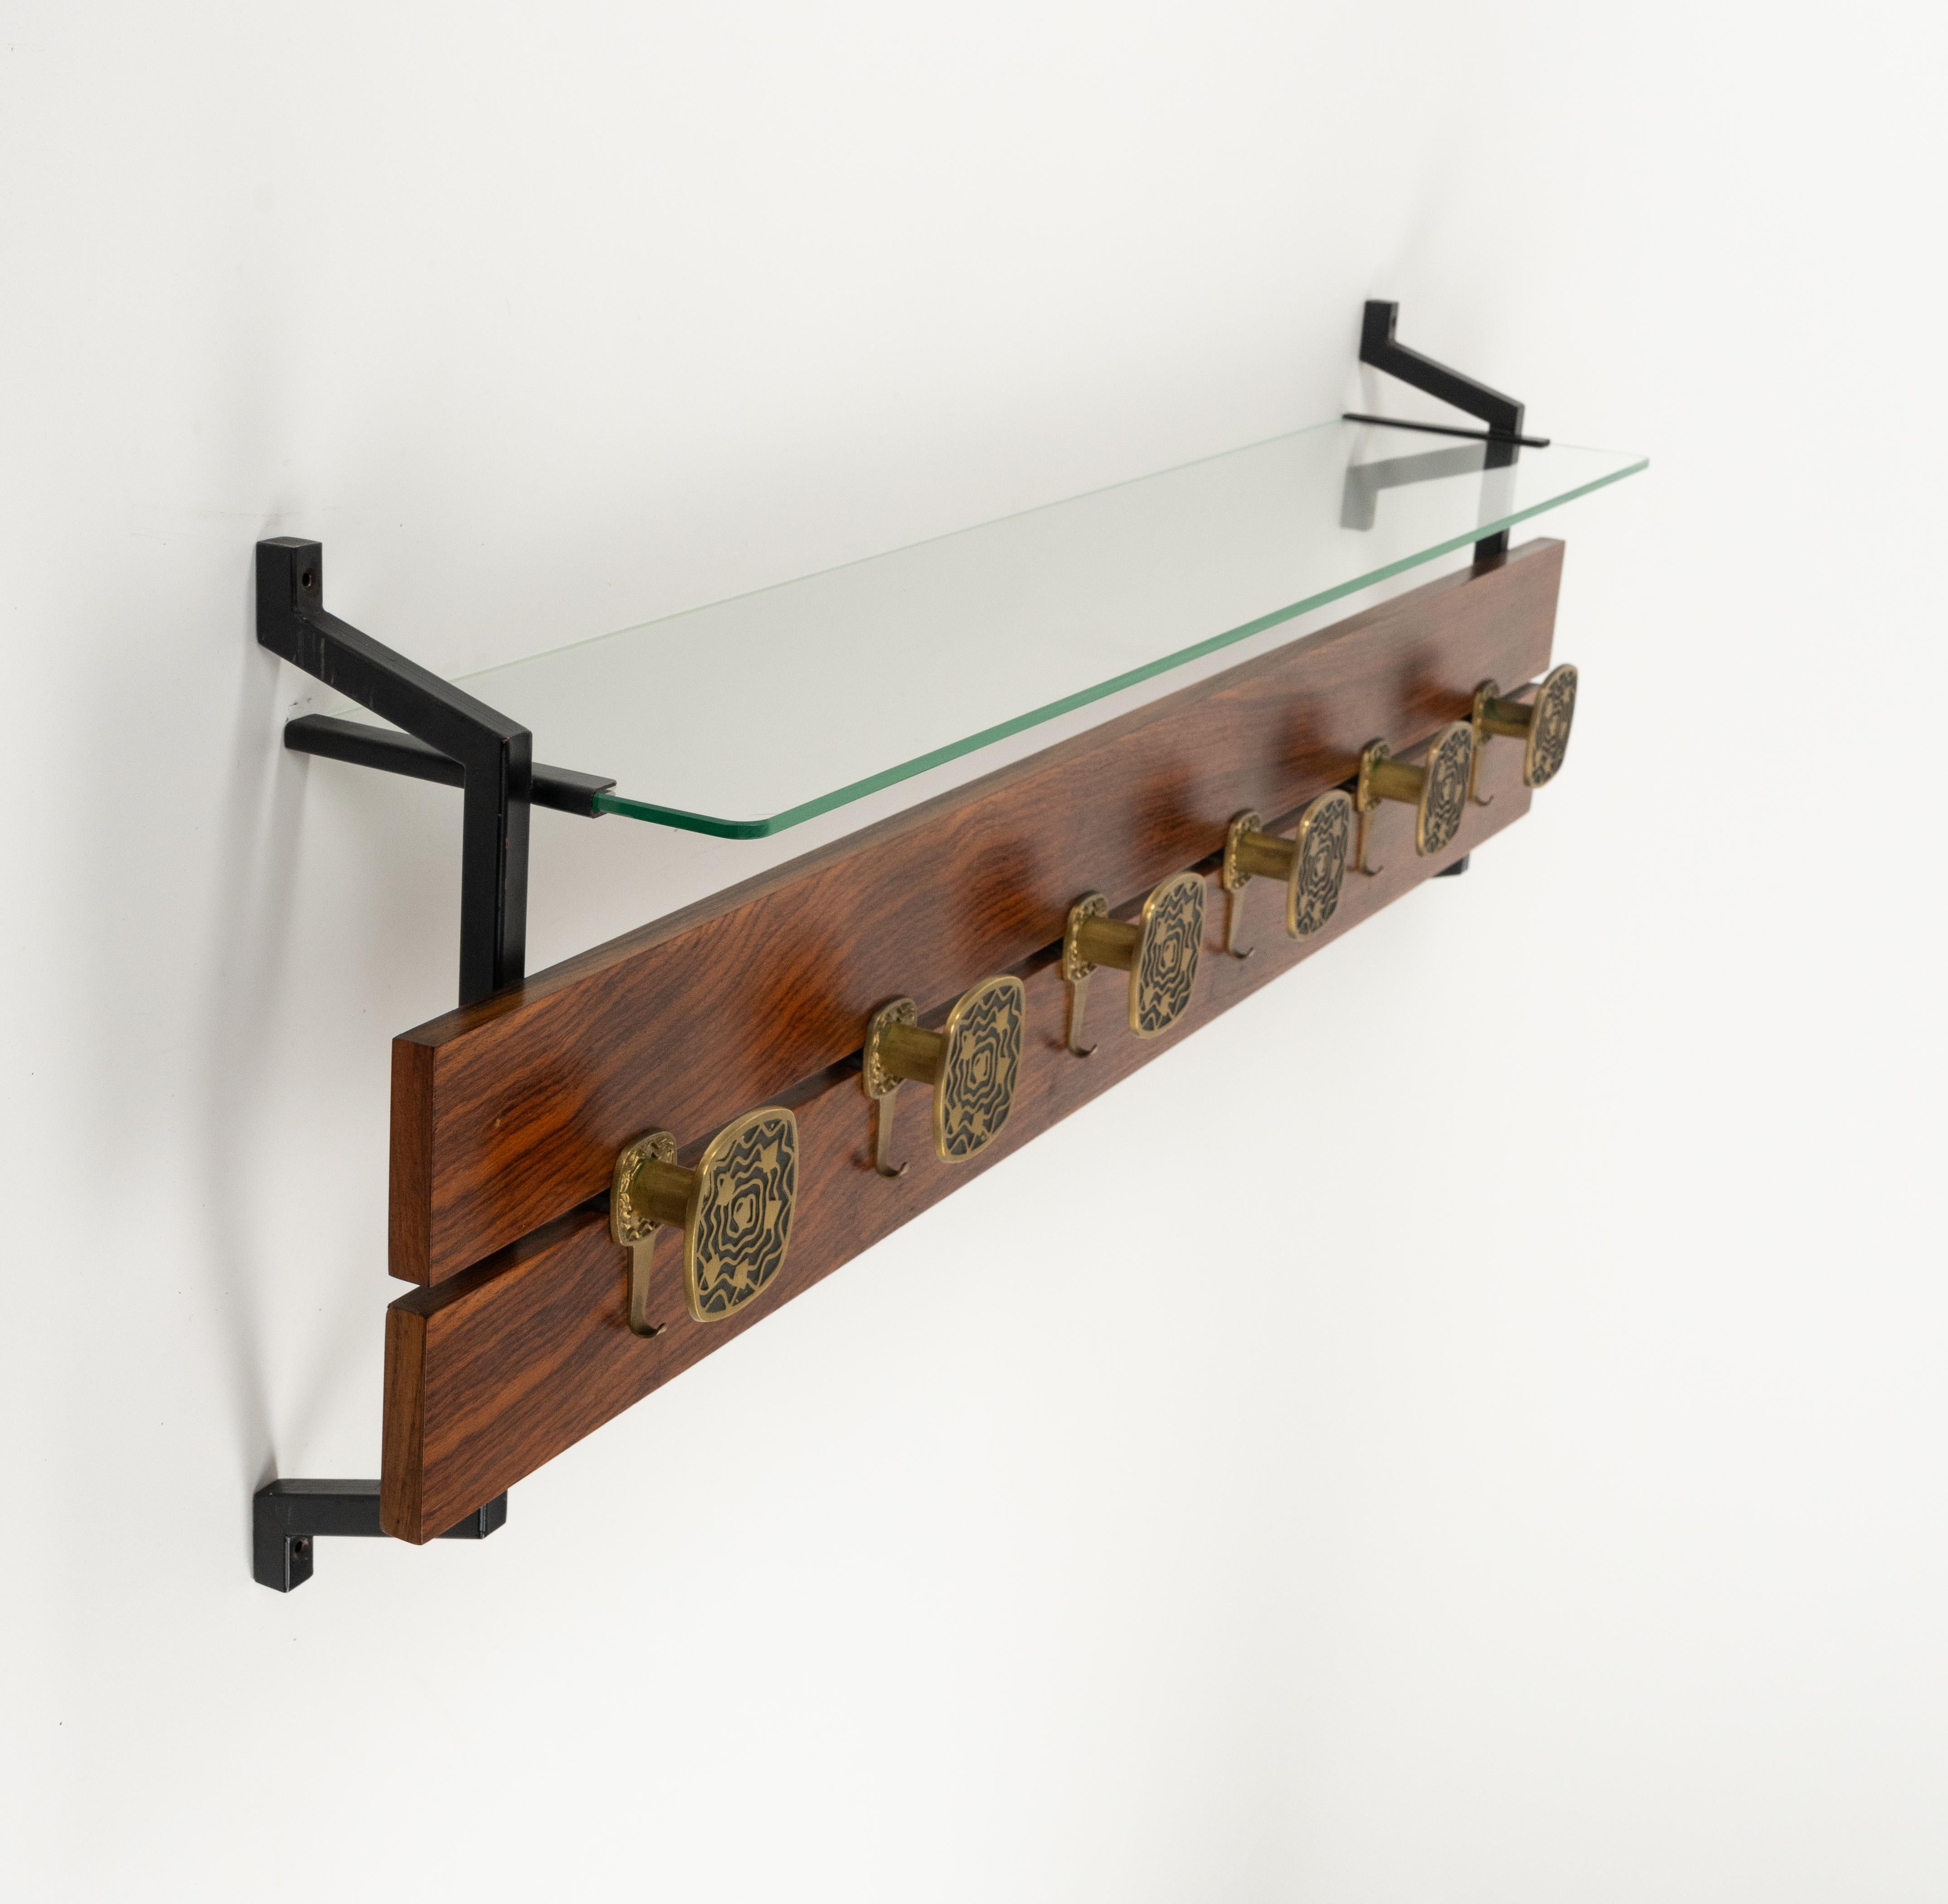 Late 20th Century Midcentury Wood, Glass and Brass Coat Rack Herta Baller Style, Italy 1970s For Sale